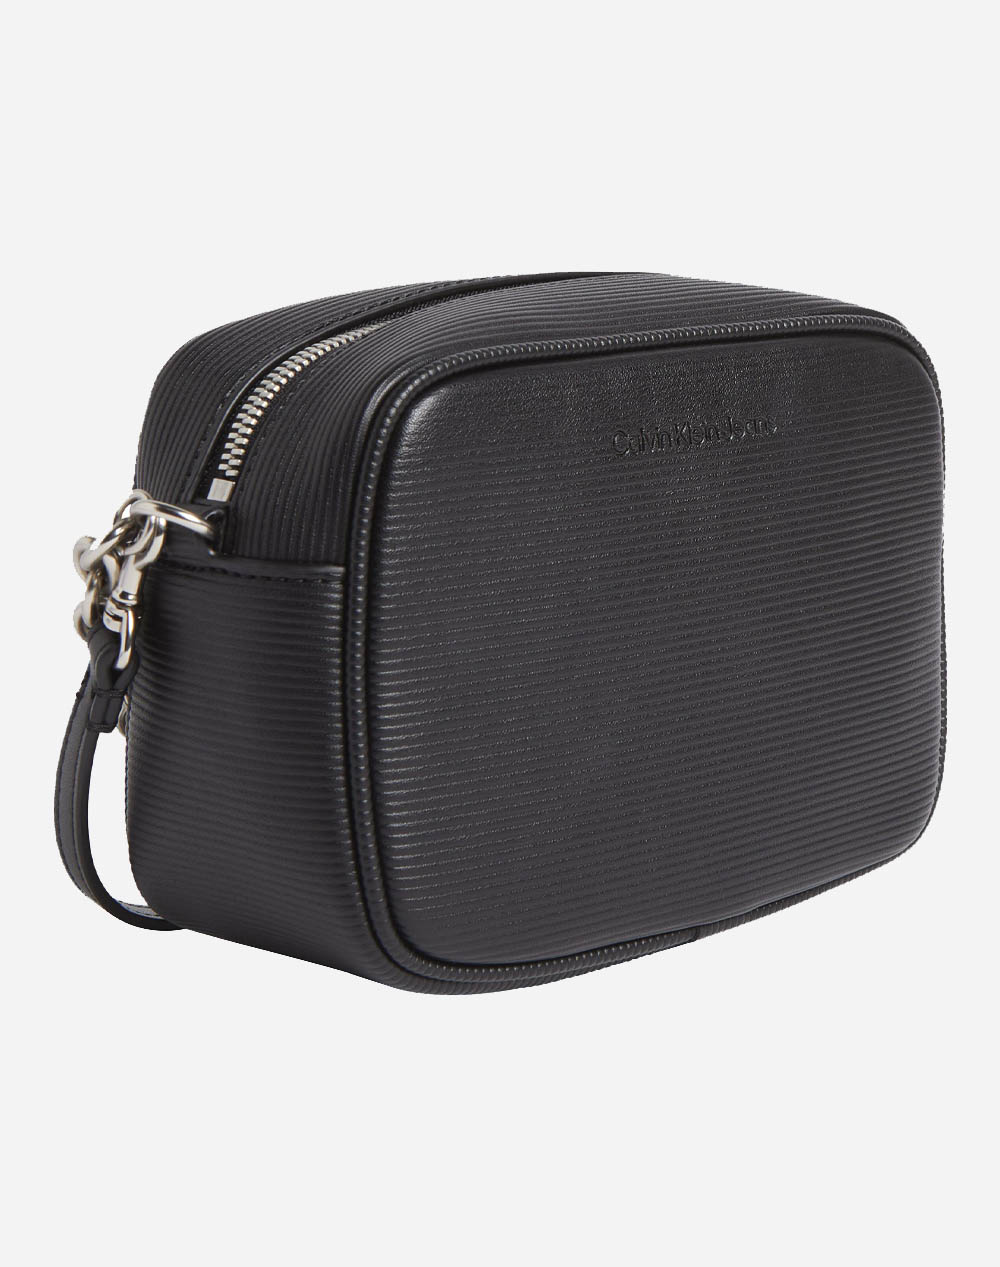 Calvin Klein Ck Must Phone Pouch Xbody-emb Mn - Mobile accessories 